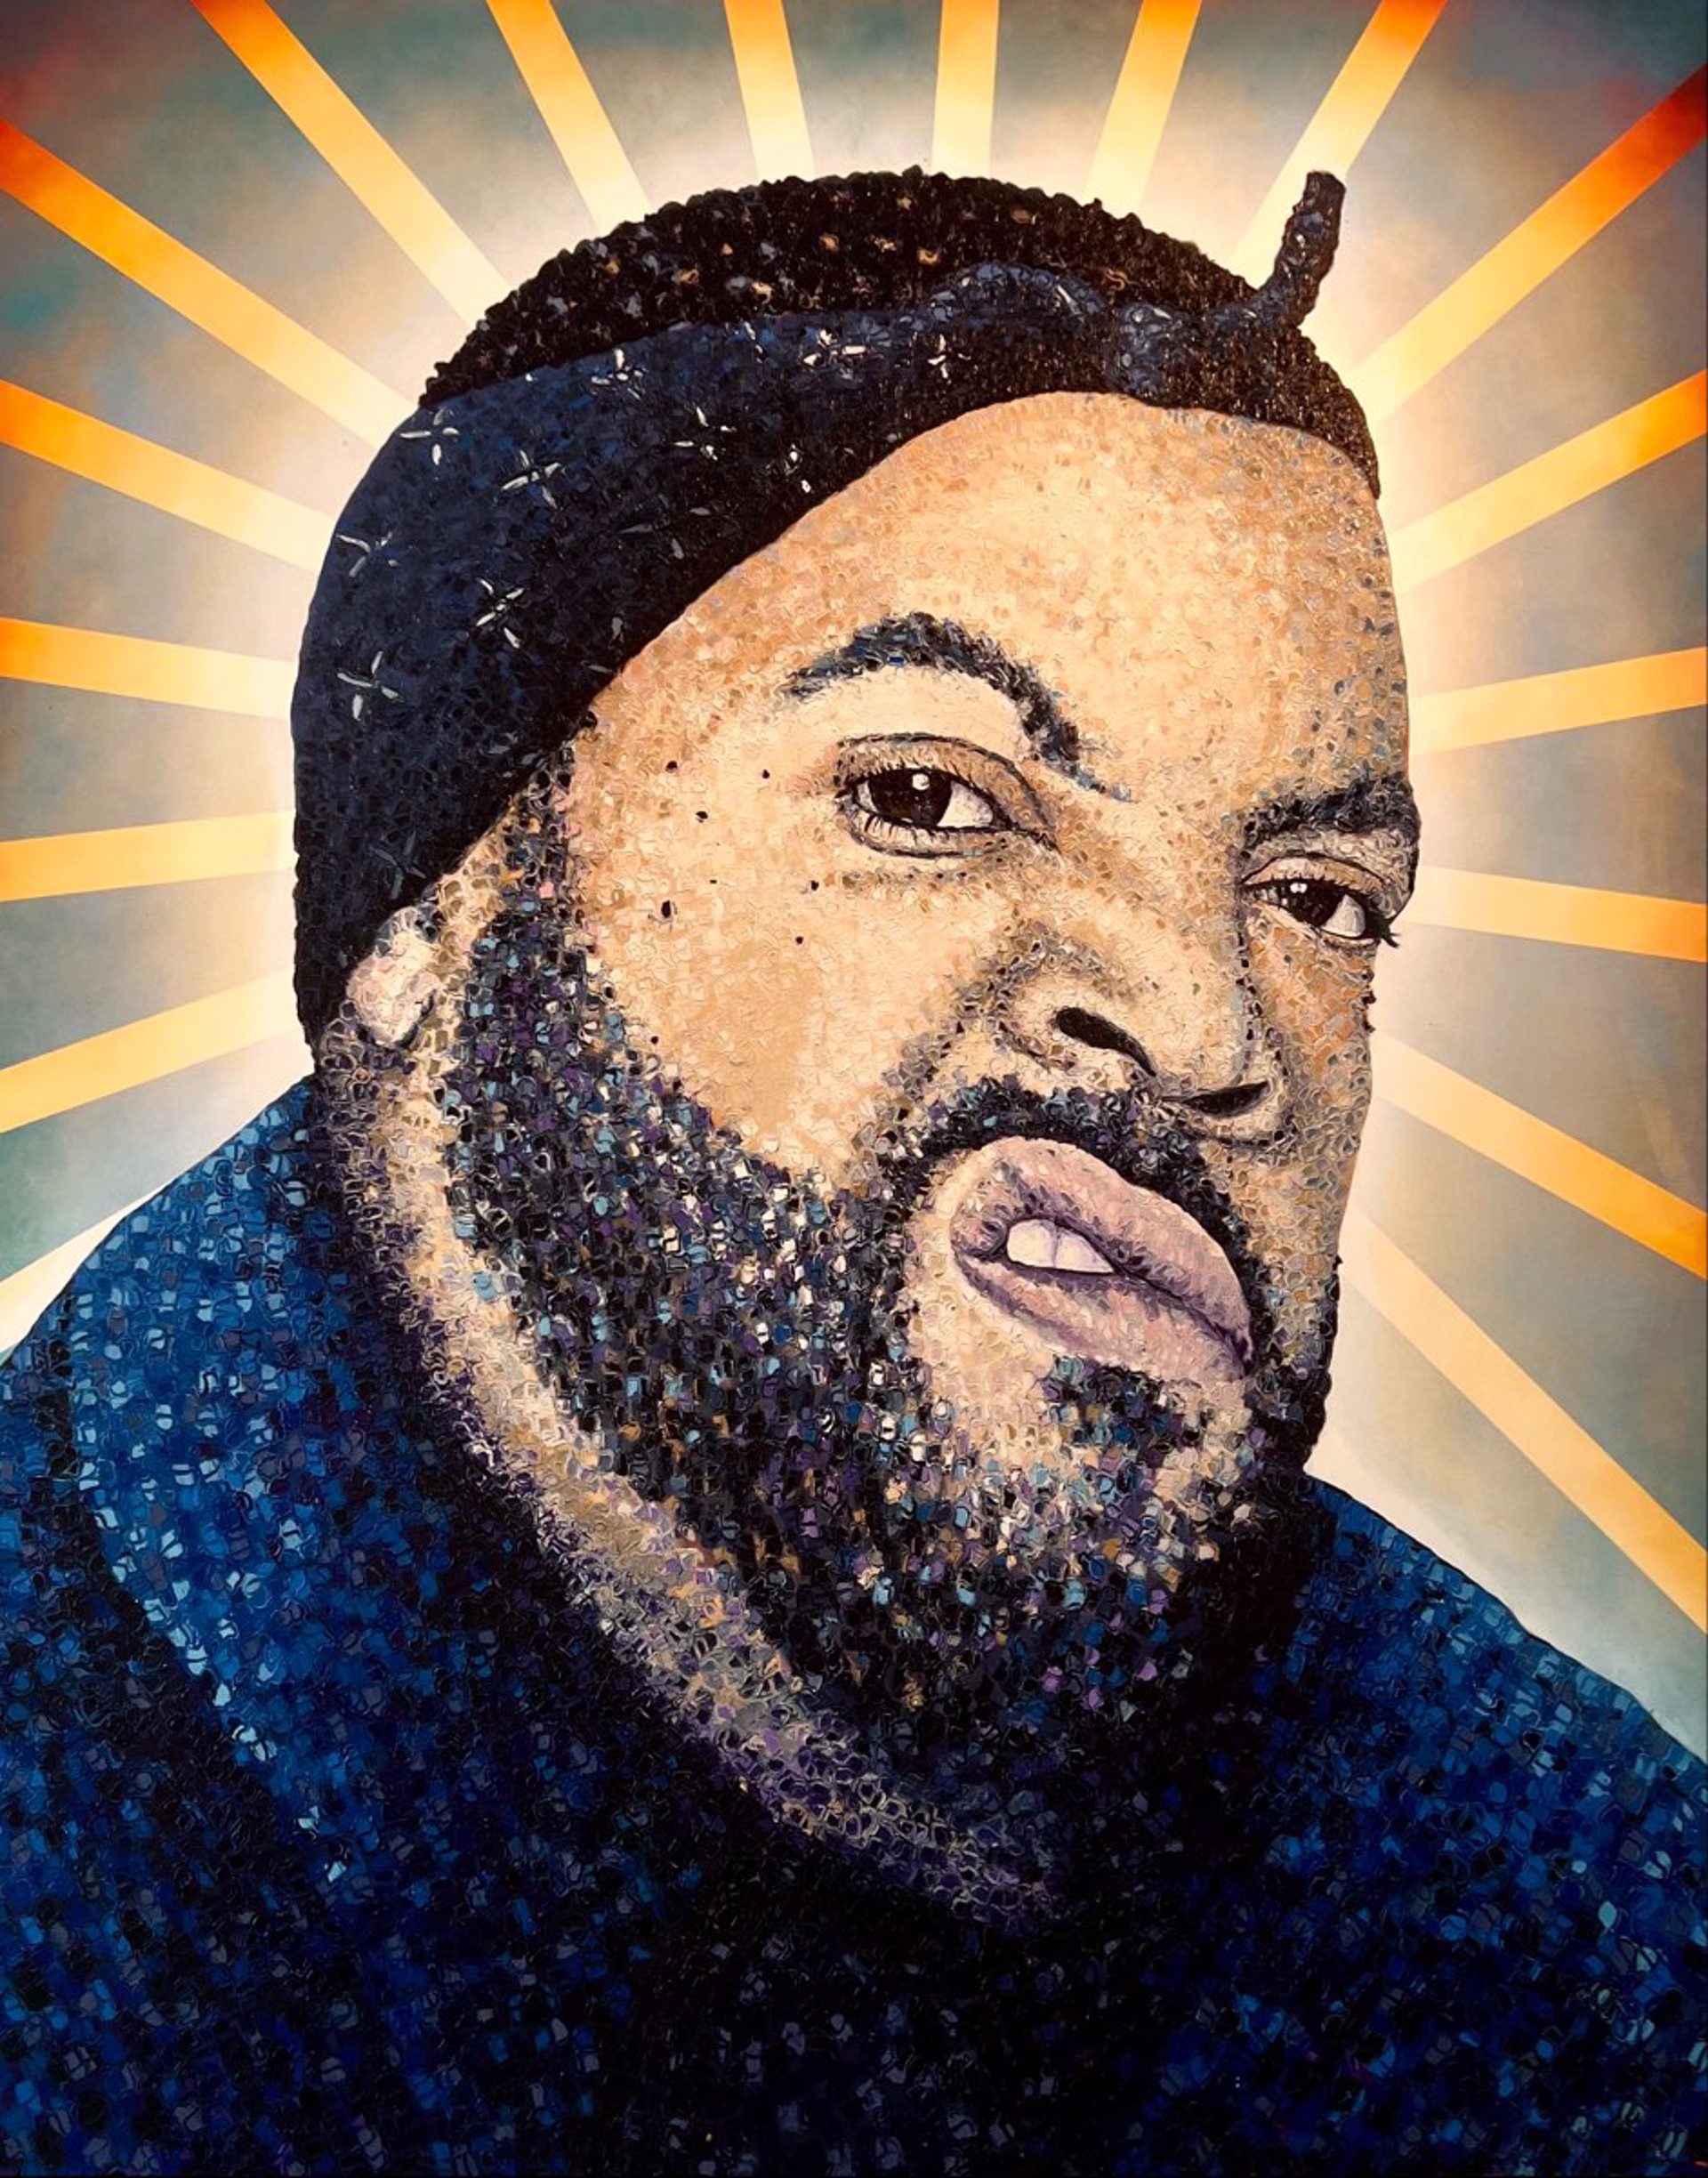 "Today was a Good Day" (Ice Cube) by Bradley Gordon